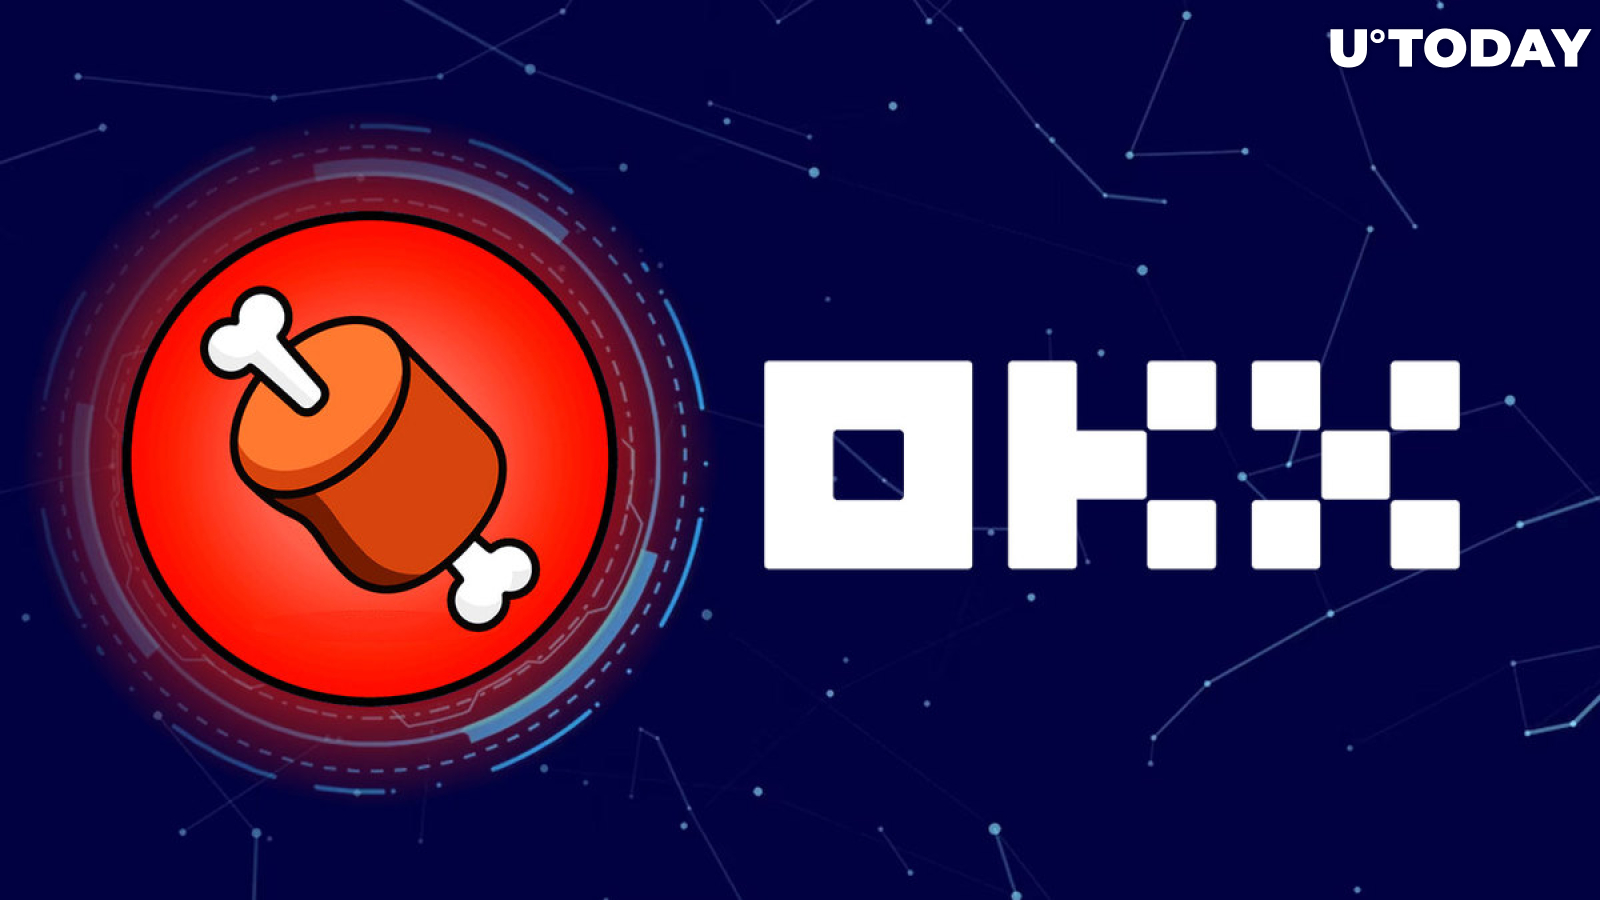 Shiba Inu's BONE Gains Attention From OKX as Exchange Teases New Listing, Giveaway